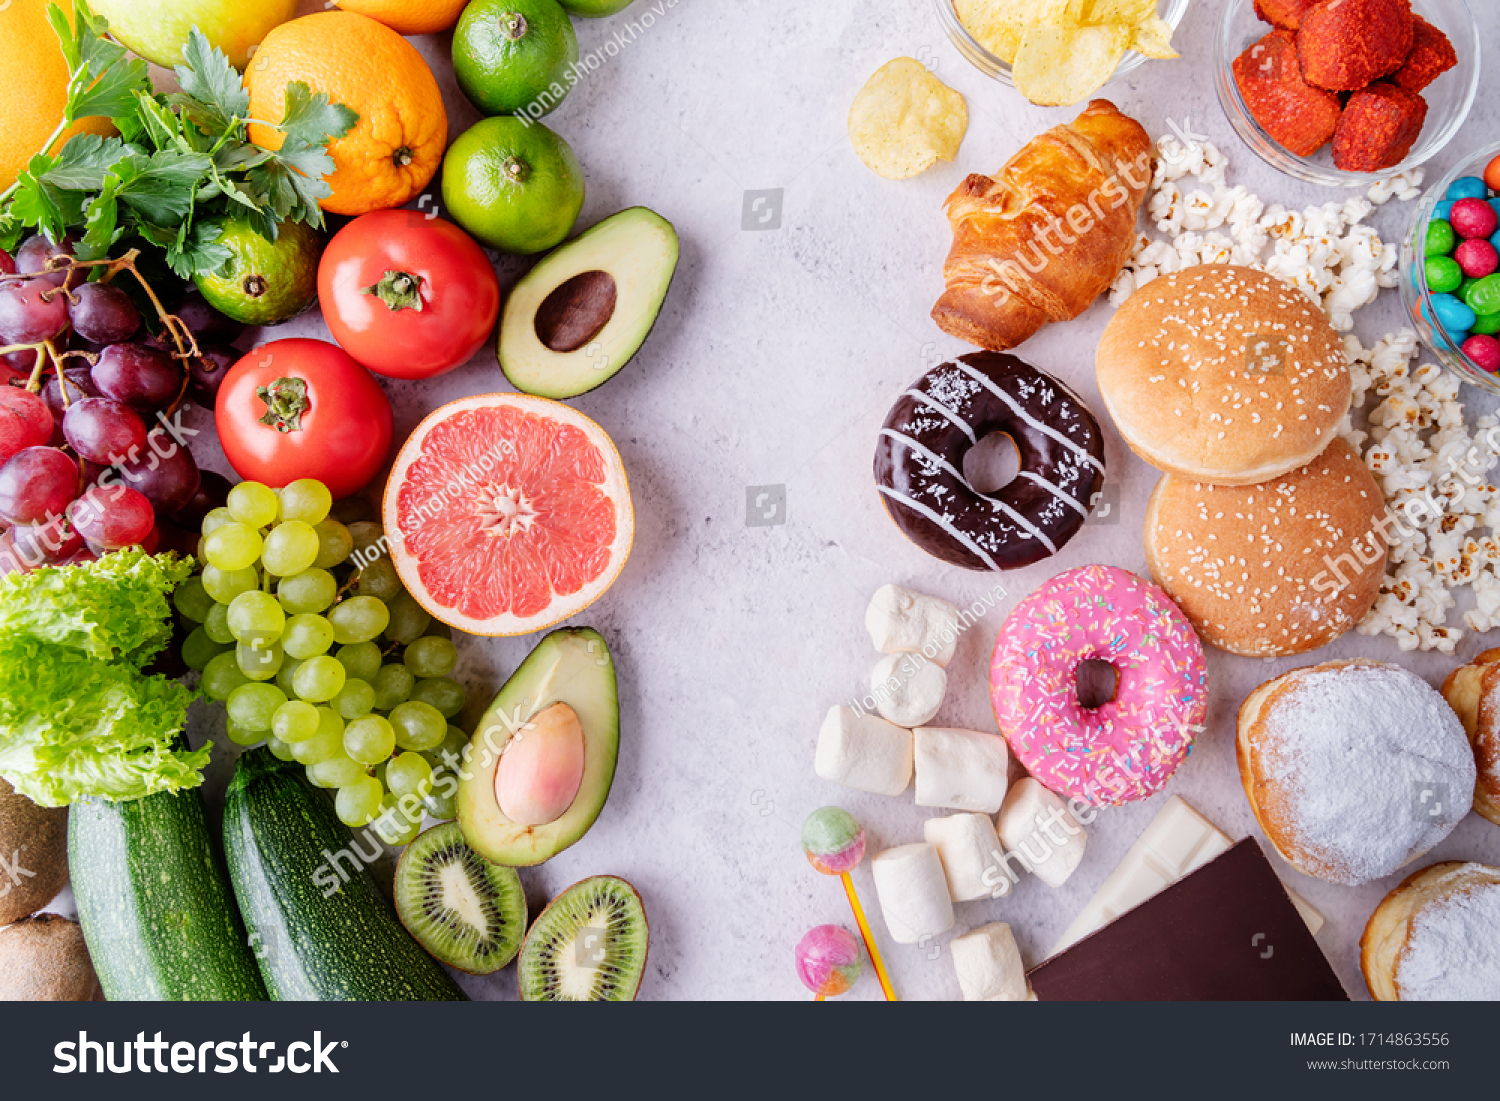 Healthy and unhealthy food concept. Top view of fast and sweet food vs fruit and vegetables #1714863556